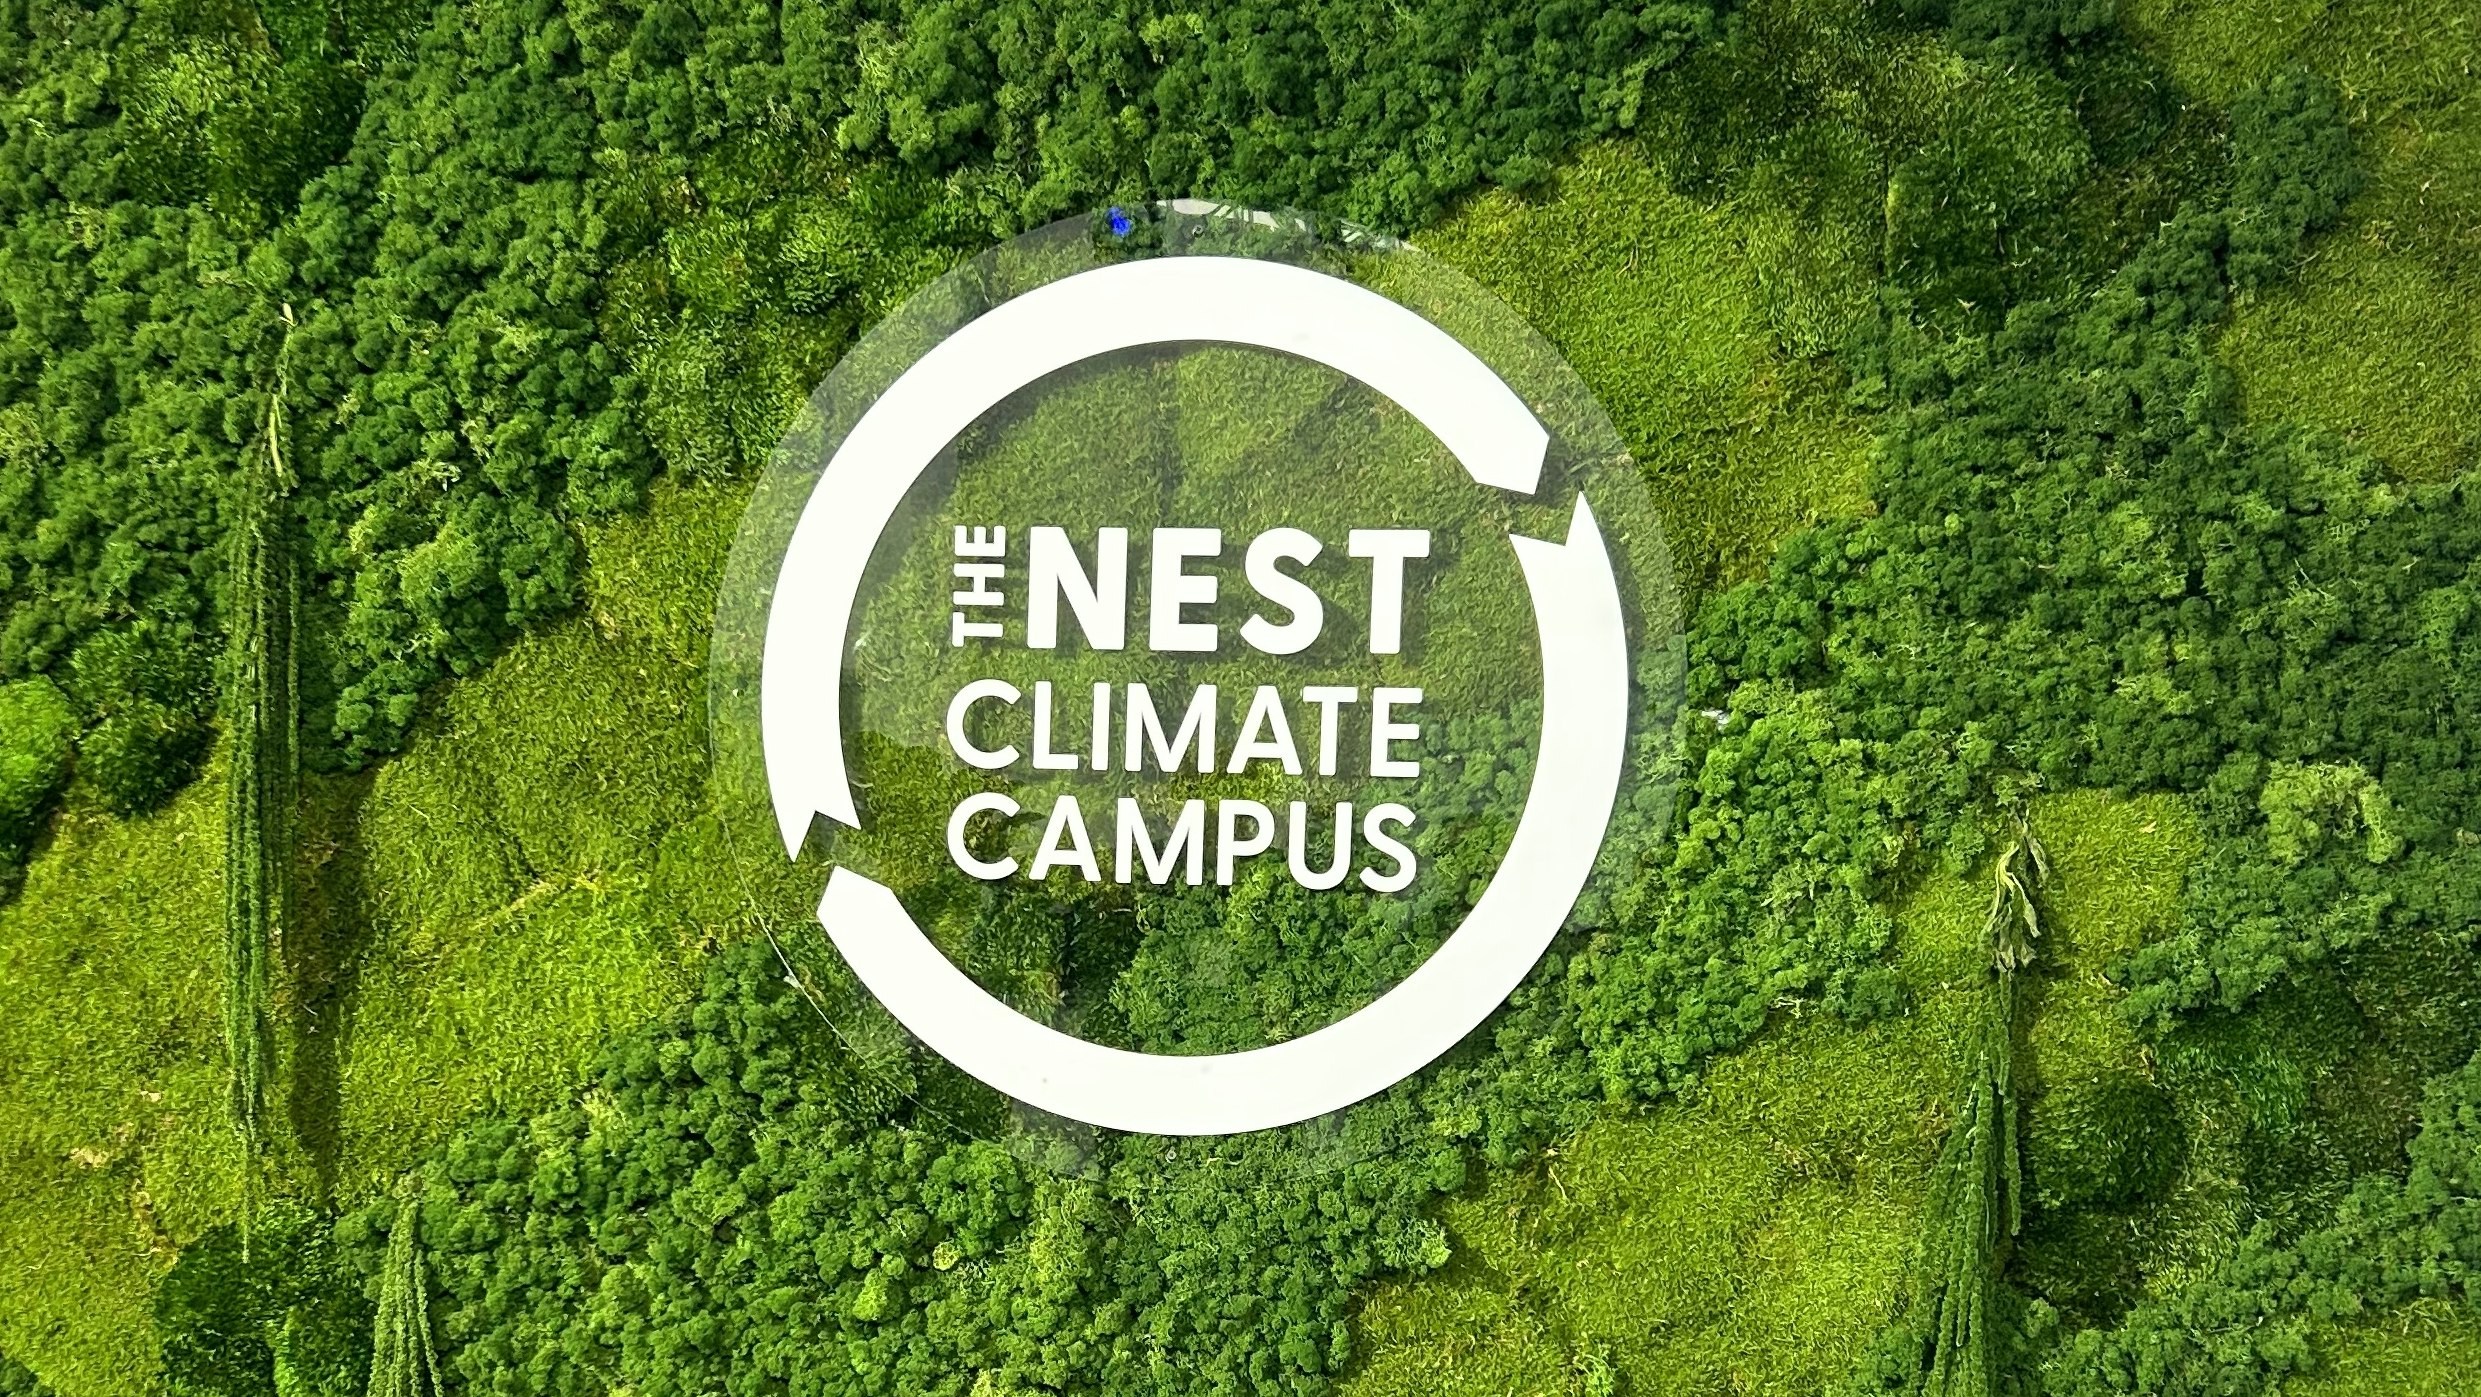 The Shipyard to Host Fireside Chat at The Nest Climate Campus